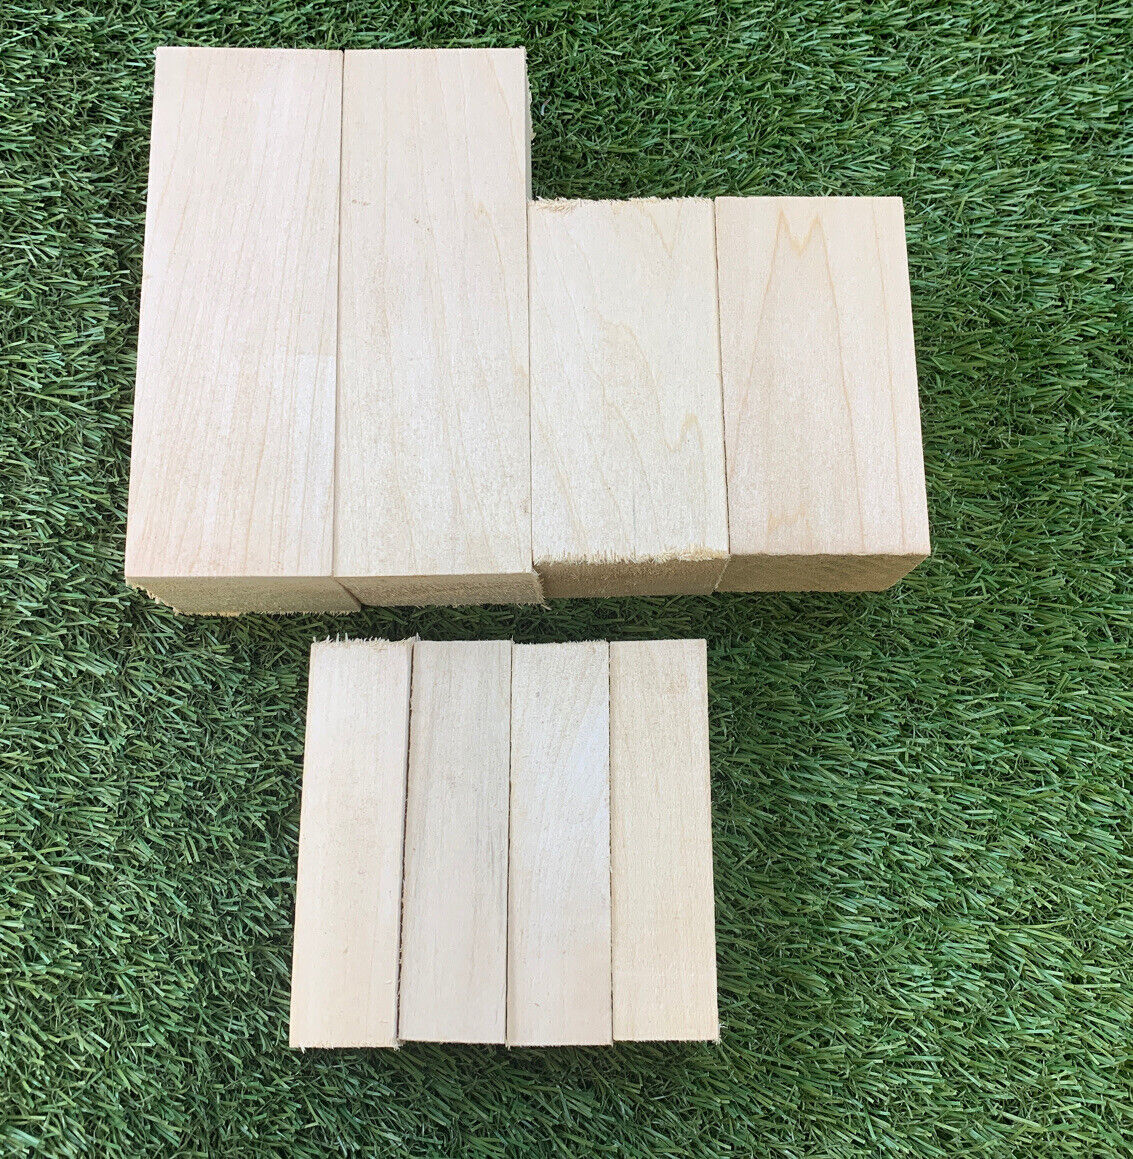 1 x 6 x 12 Basswood Carving Wood Blocks Craft Lumber *KILN DRIED* 4  pieces – Tacos Y Mas